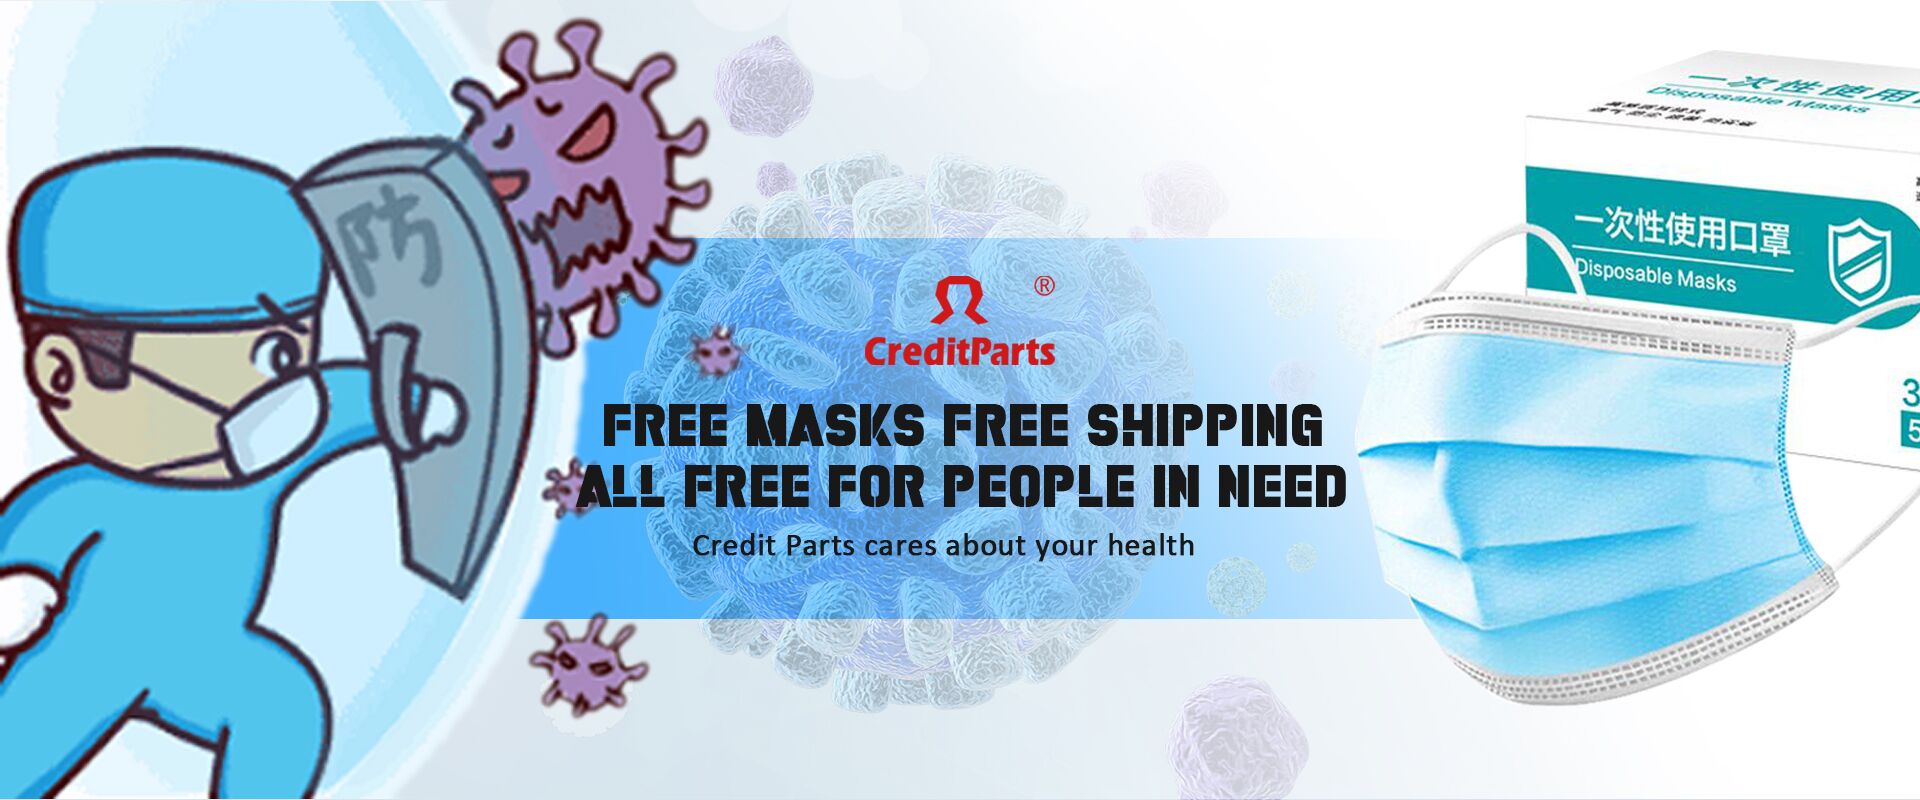 Free Masks ，Free shipping ，All free ----For People In Need